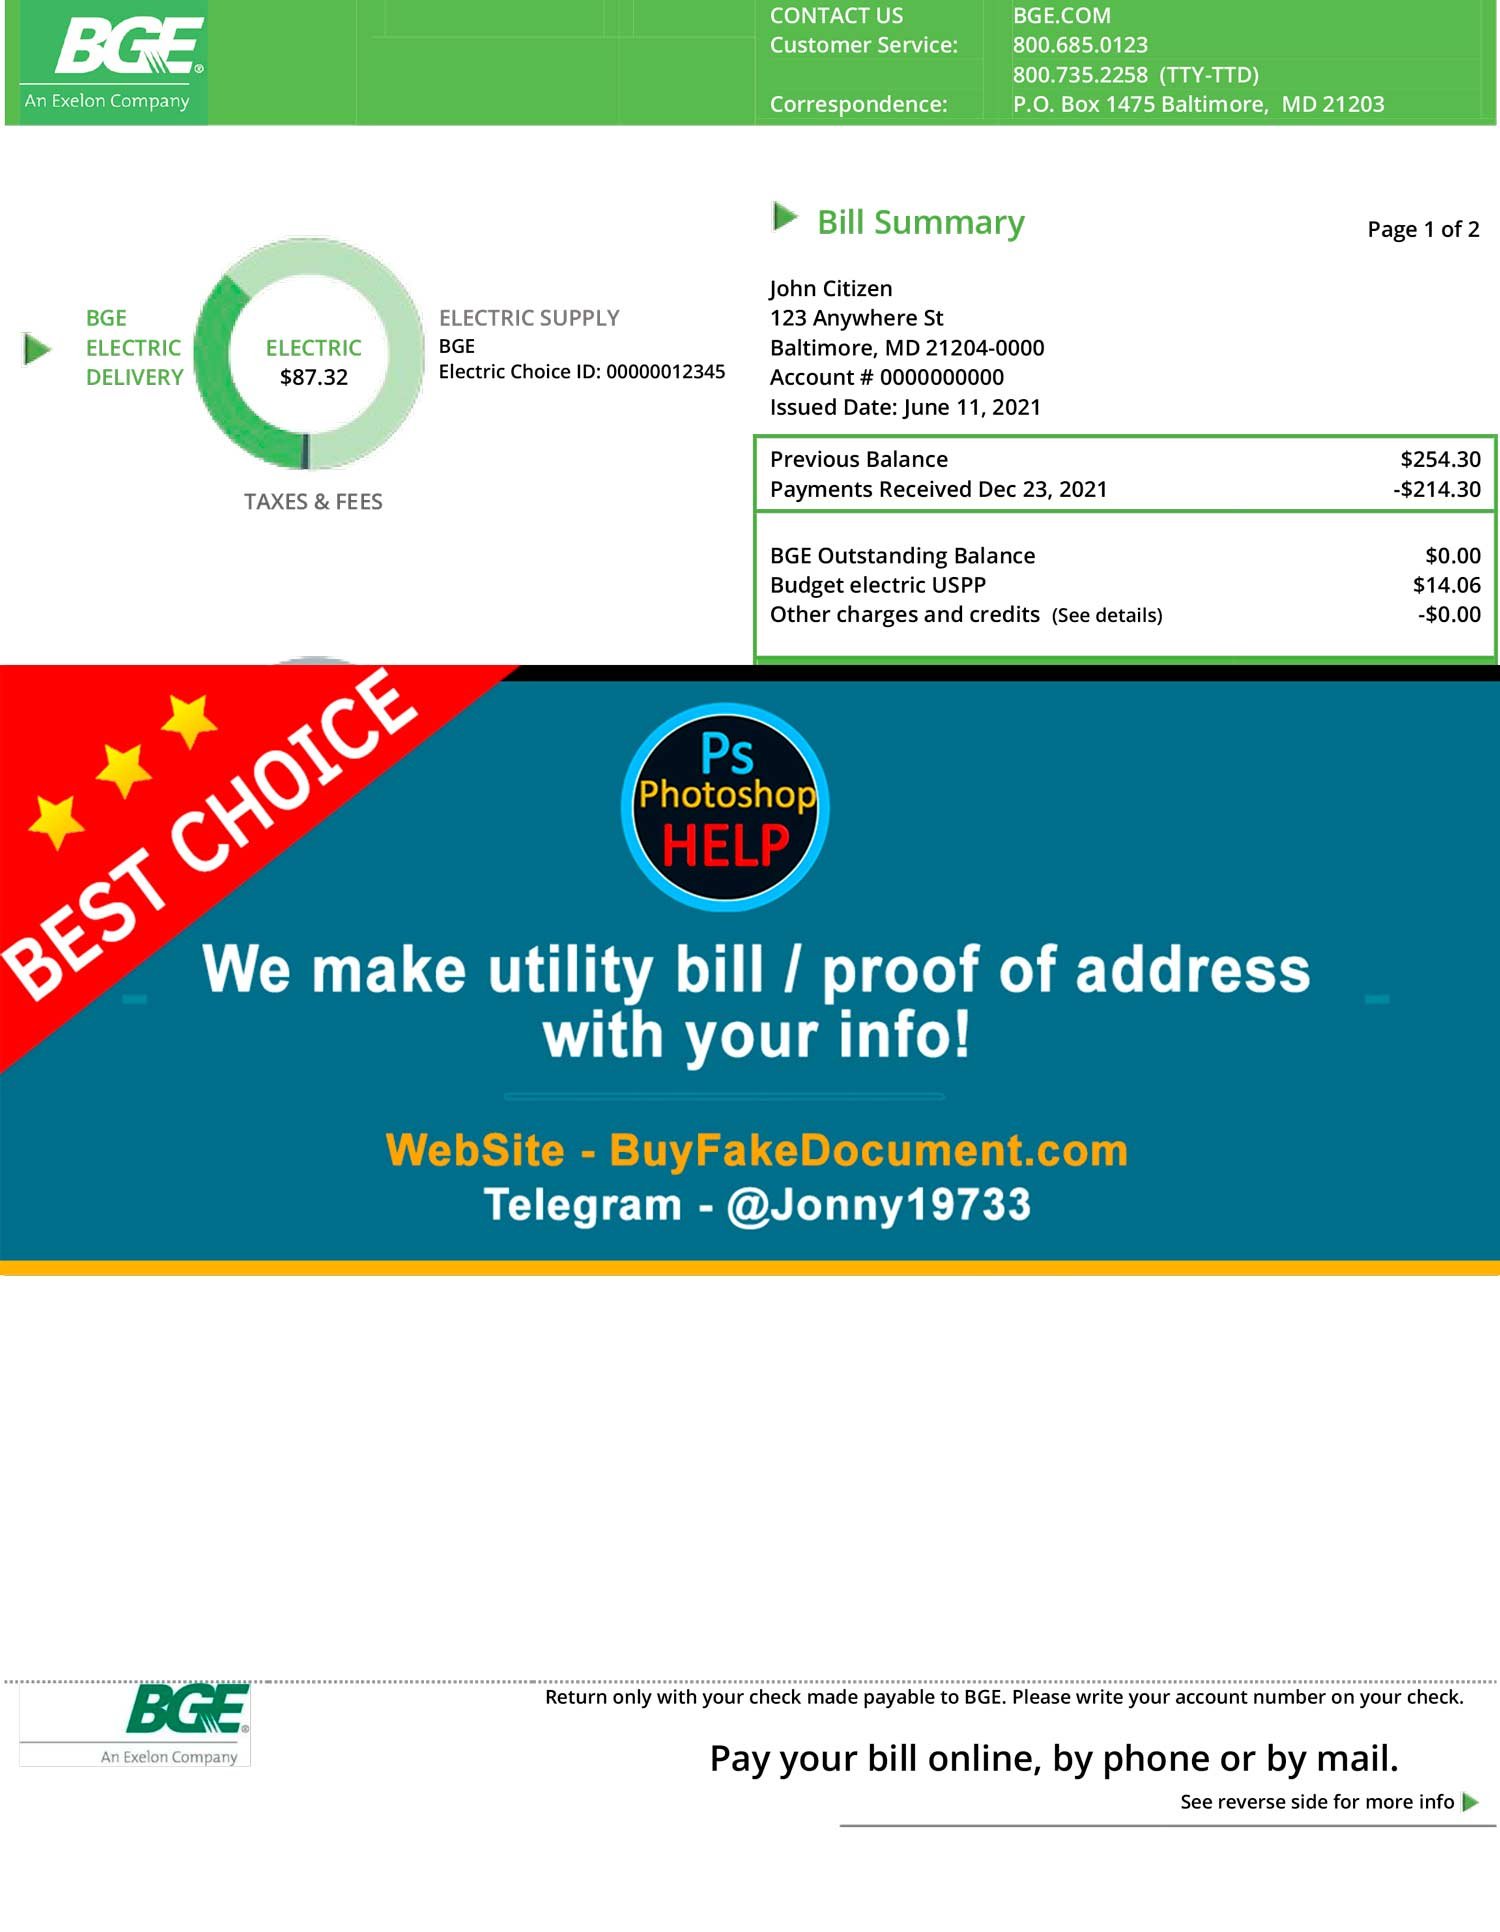 Maryland Baltimore Gas and Electric (BGE) Fake Utility bill